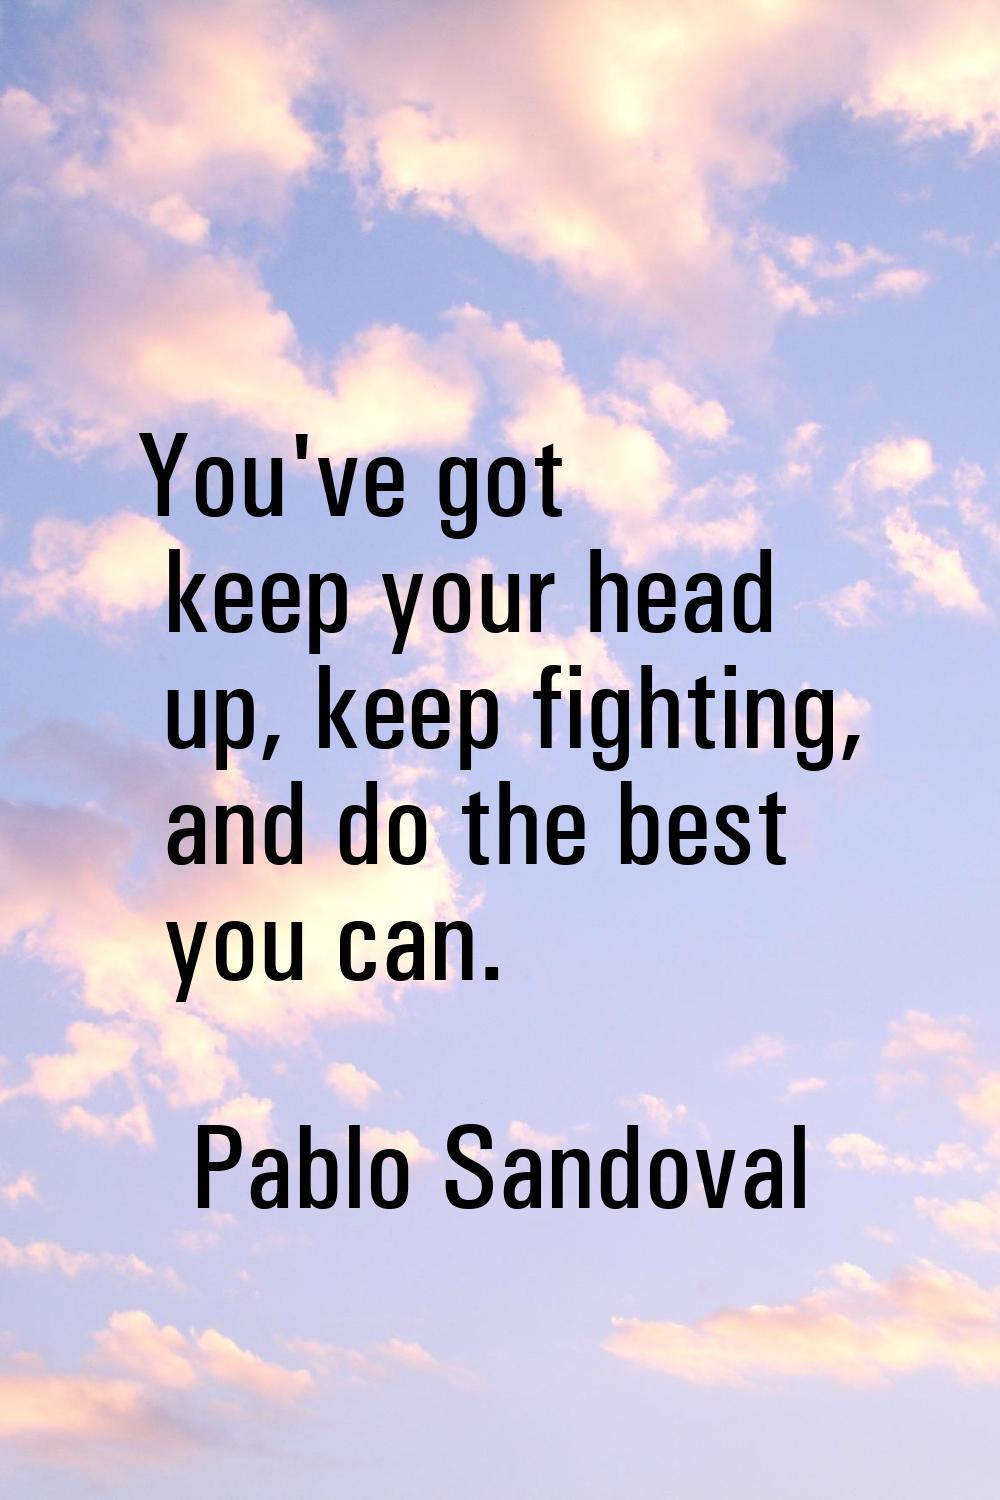 You've got keep your head up, keep fighting, and do the best you can.